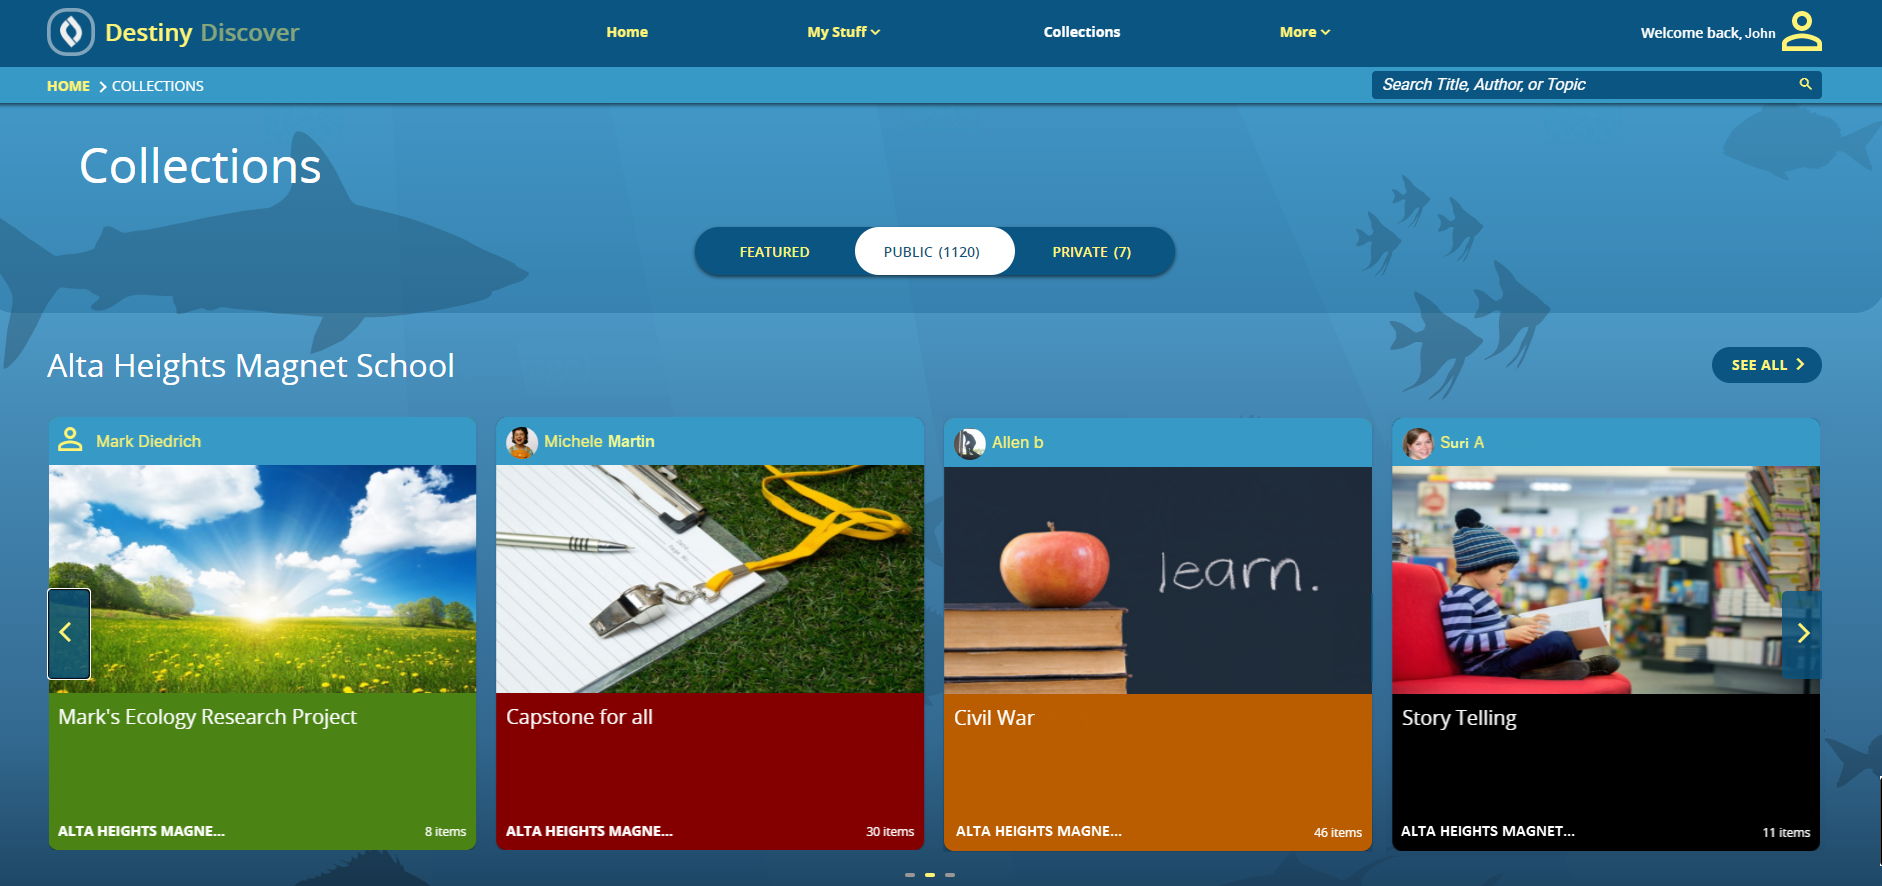 Collections homepage with Under the Sea theme.